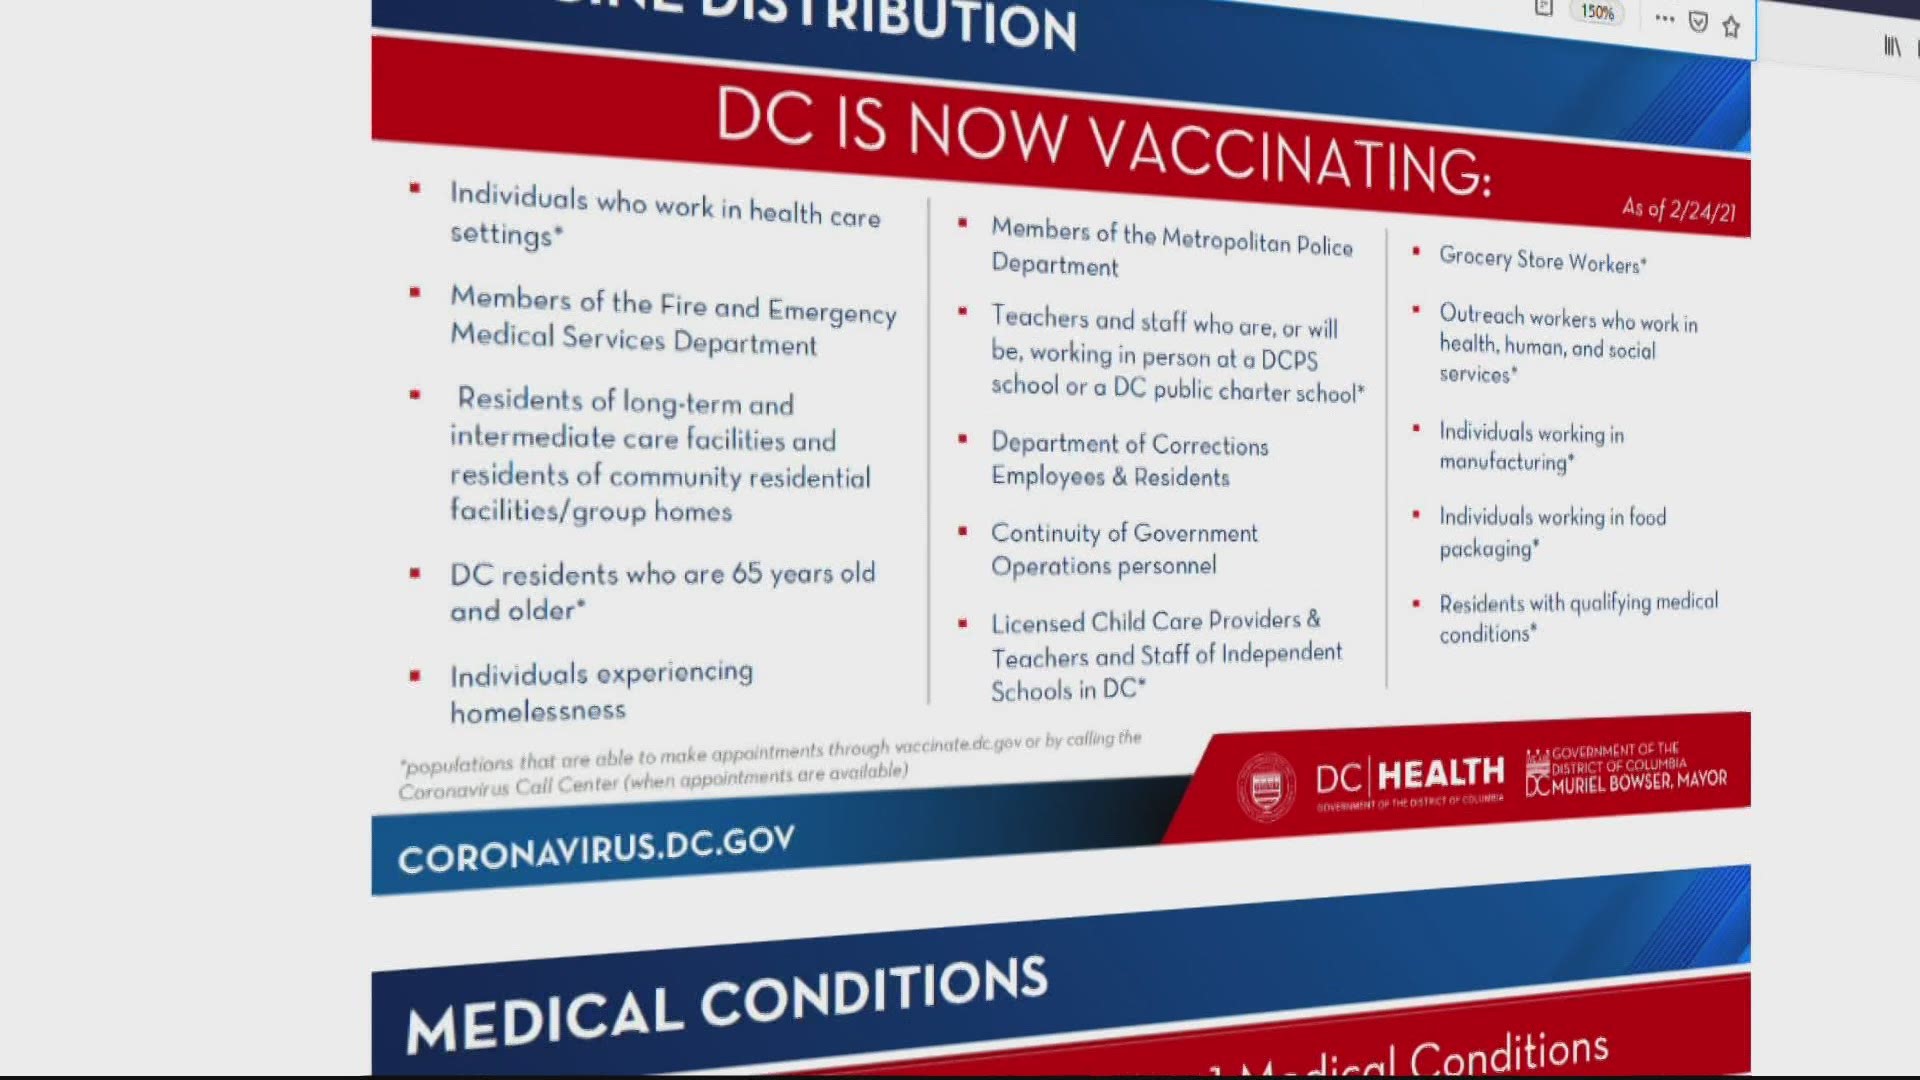 Several new mass vaccination sites will also open in D.C. to administer the Johnson & Johnson one-dose shots.